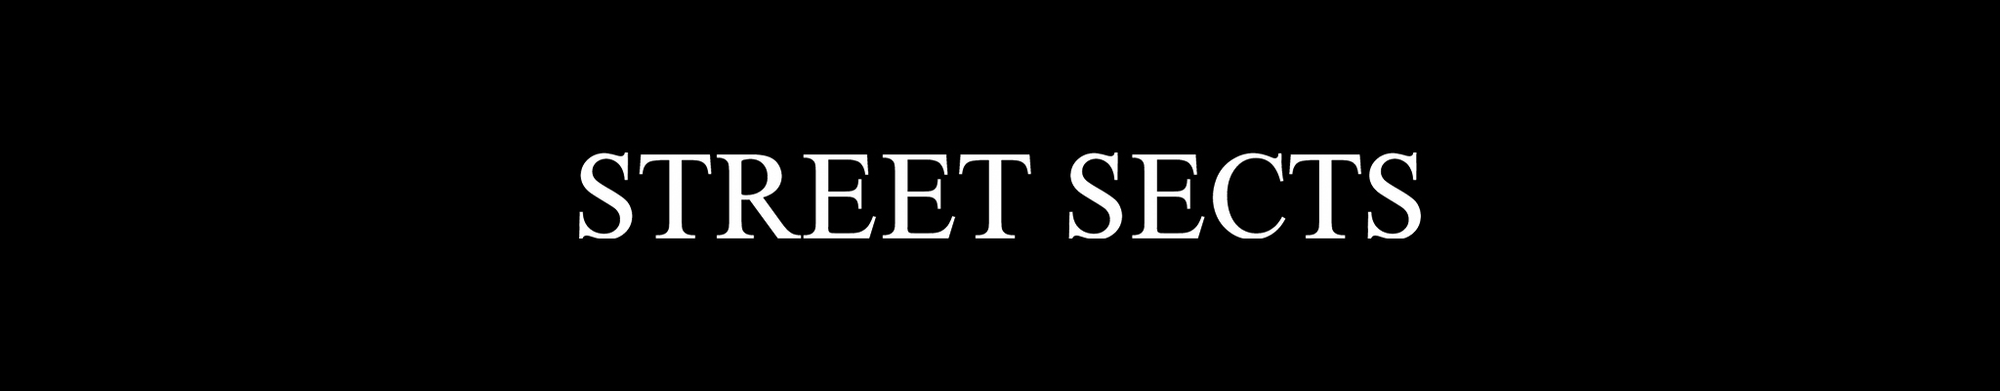 STREET SECTS